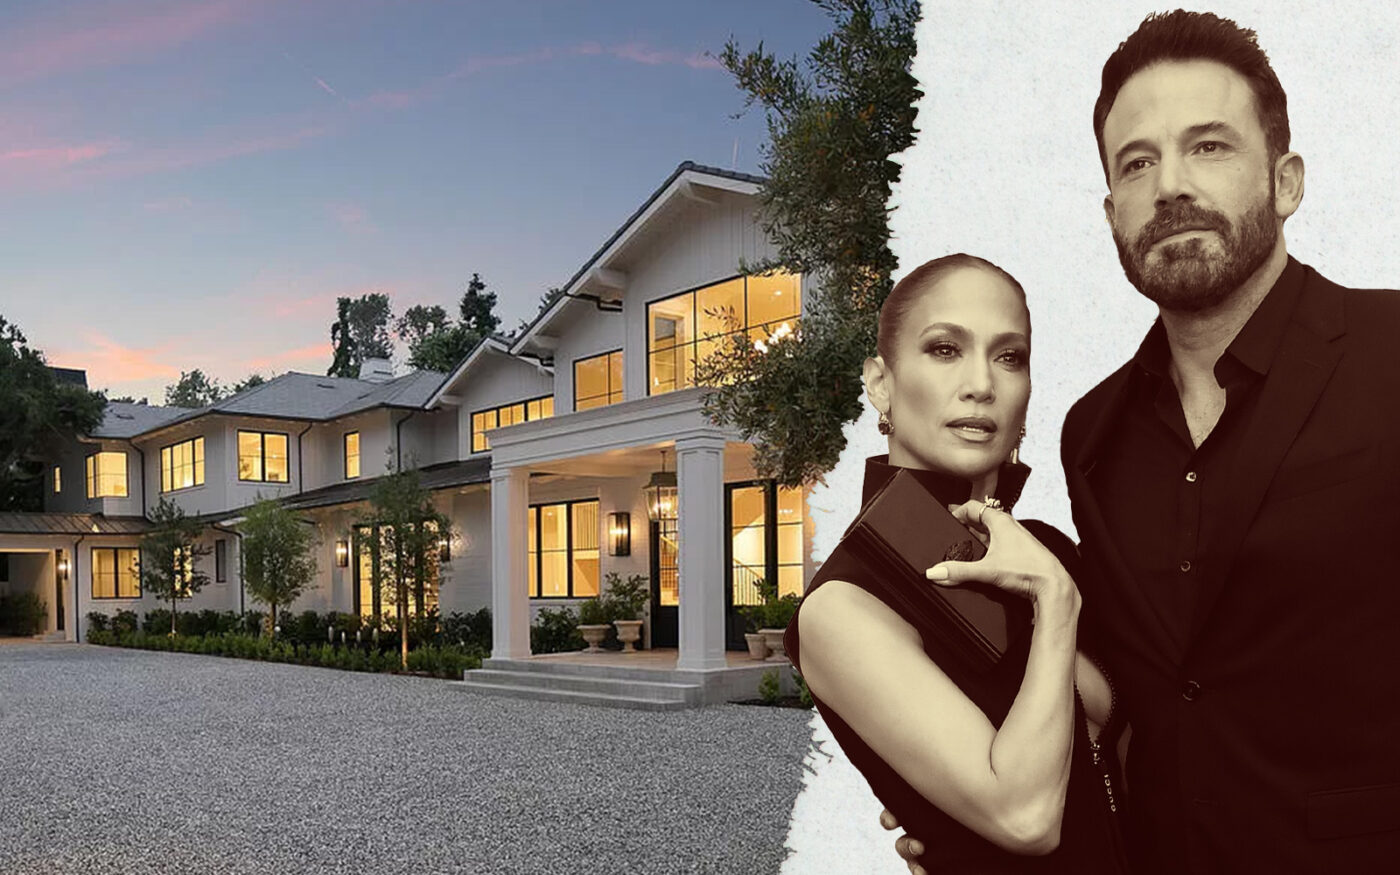 Mansion passed on by J.Lo and Ben Affleck Relists for $30M